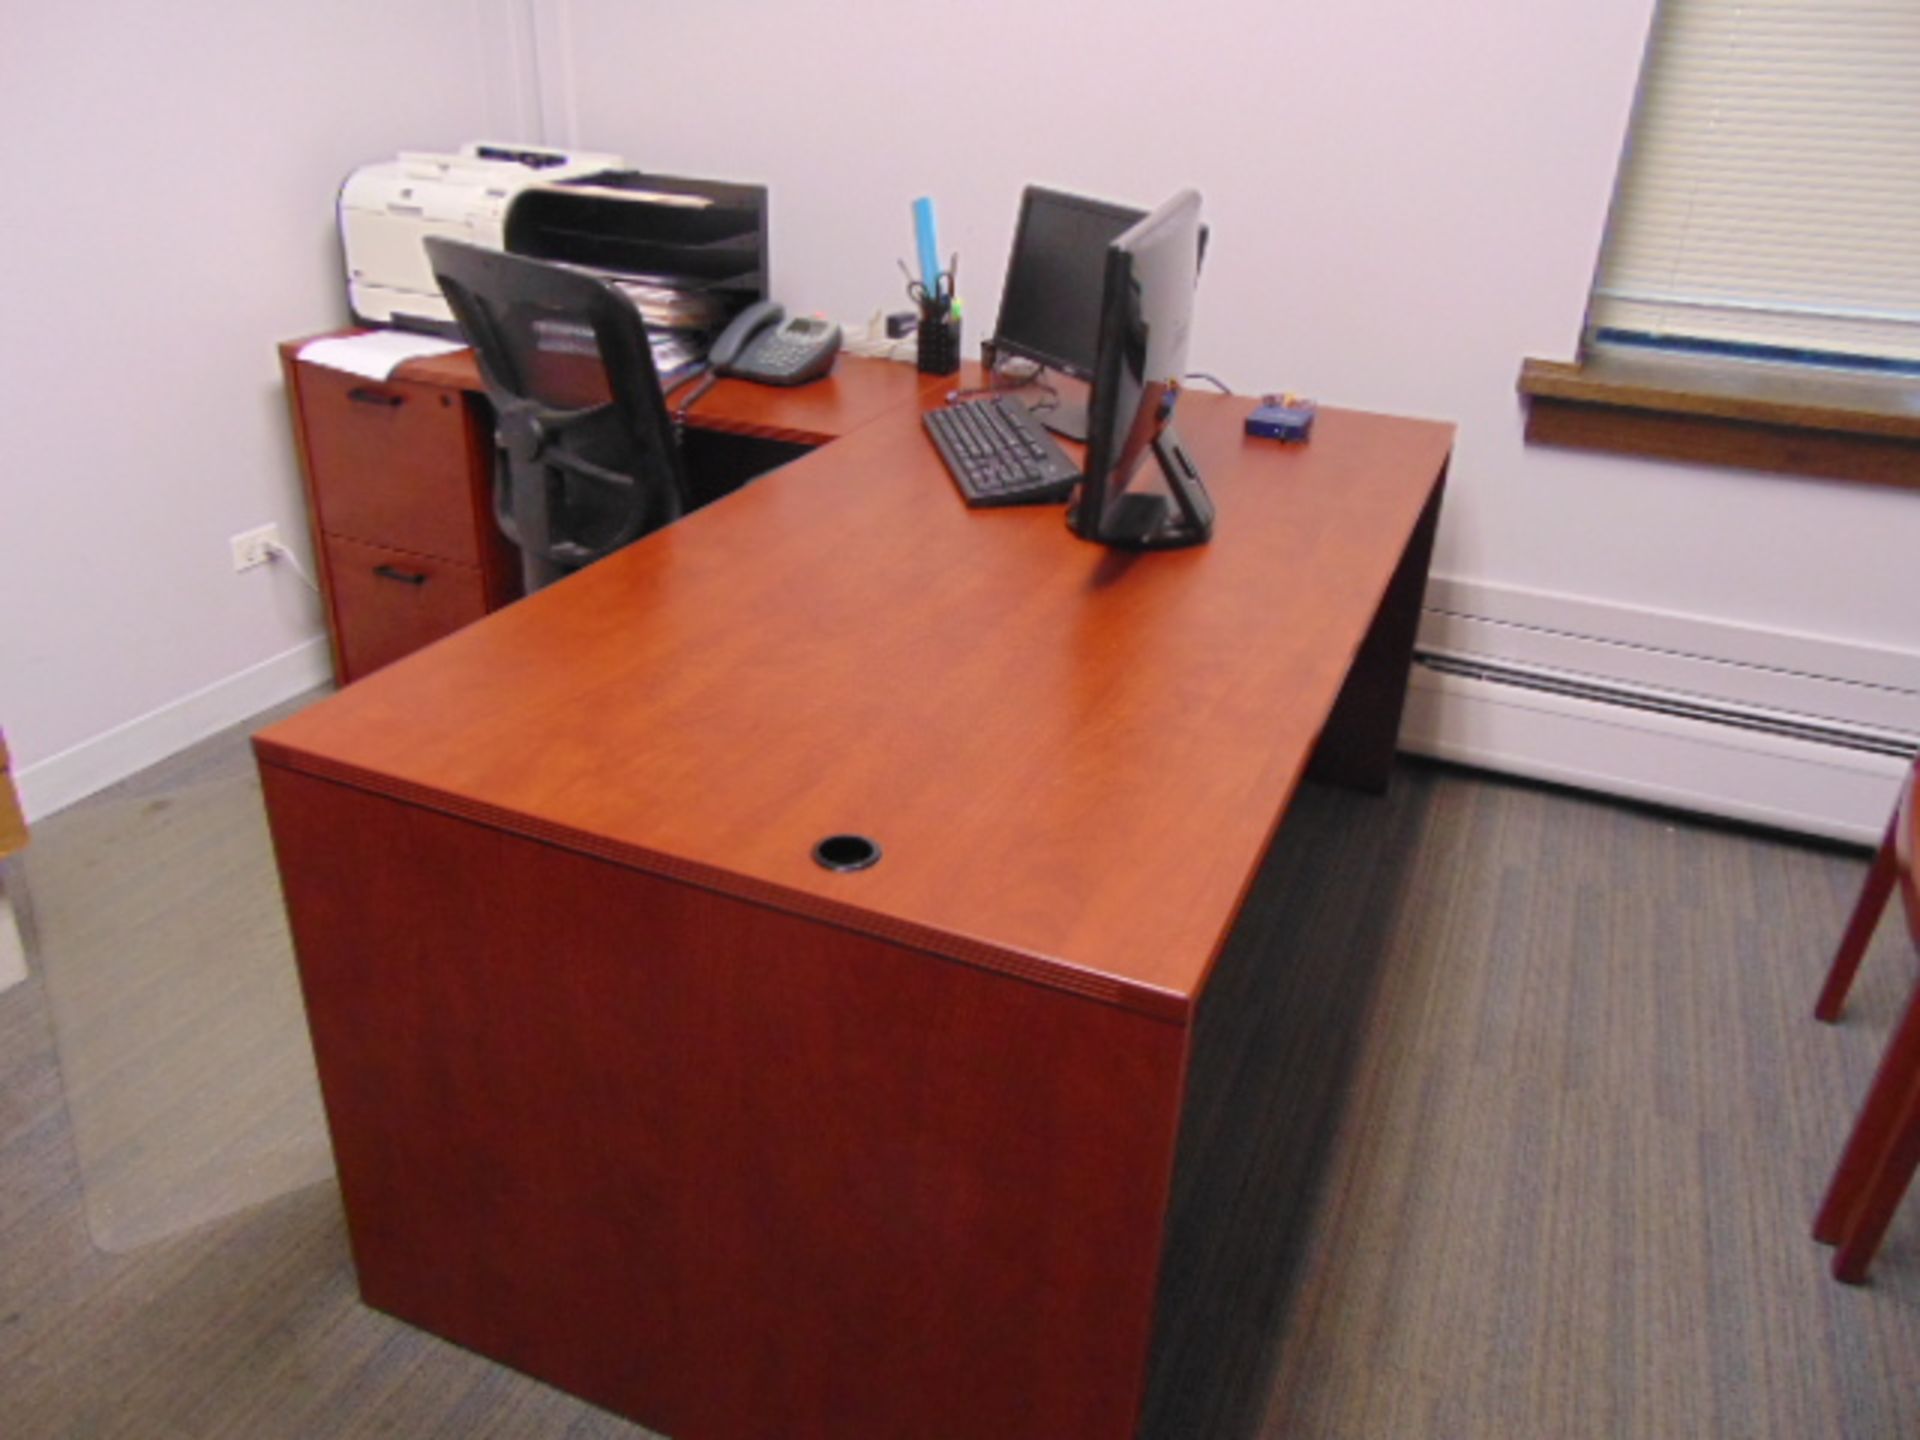 LOT CONSISTING OF: L-shaped desk, file cabinet, printer & (3) chairs (located at Block & Company, I